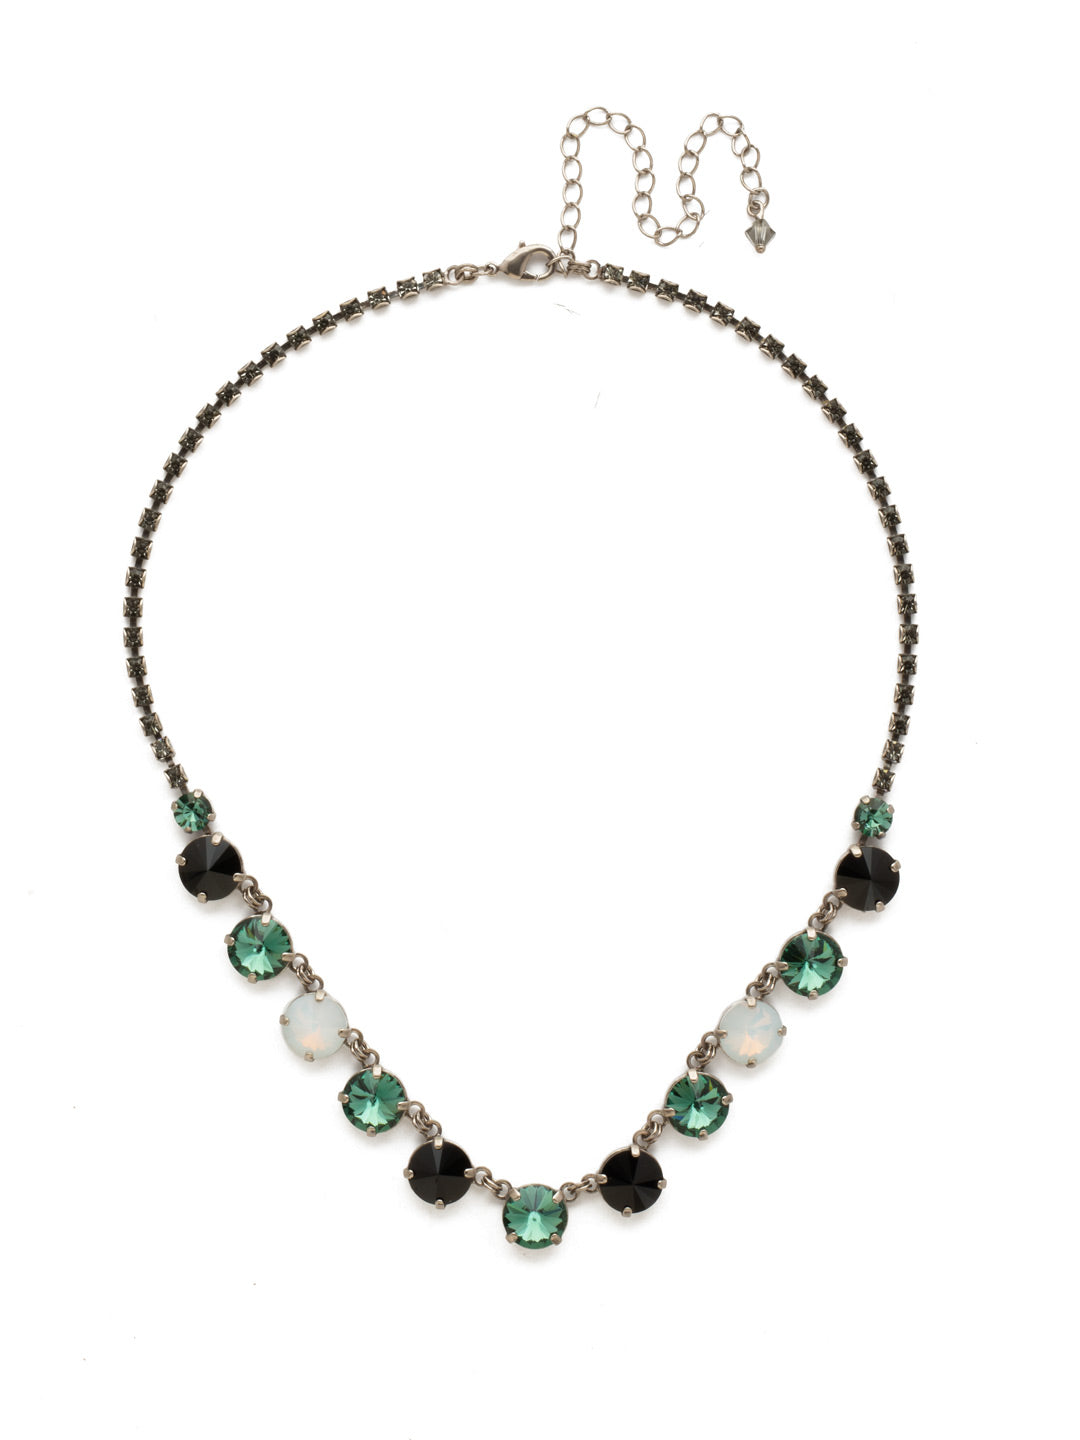 Simply Sophisticated Line Necklace - NDK6ASGDG - A row of glamorous linked round crystals adds just the right touch of sparkle to any look. From Sorrelli's Game Day Green collection in our Antique Silver-tone finish.